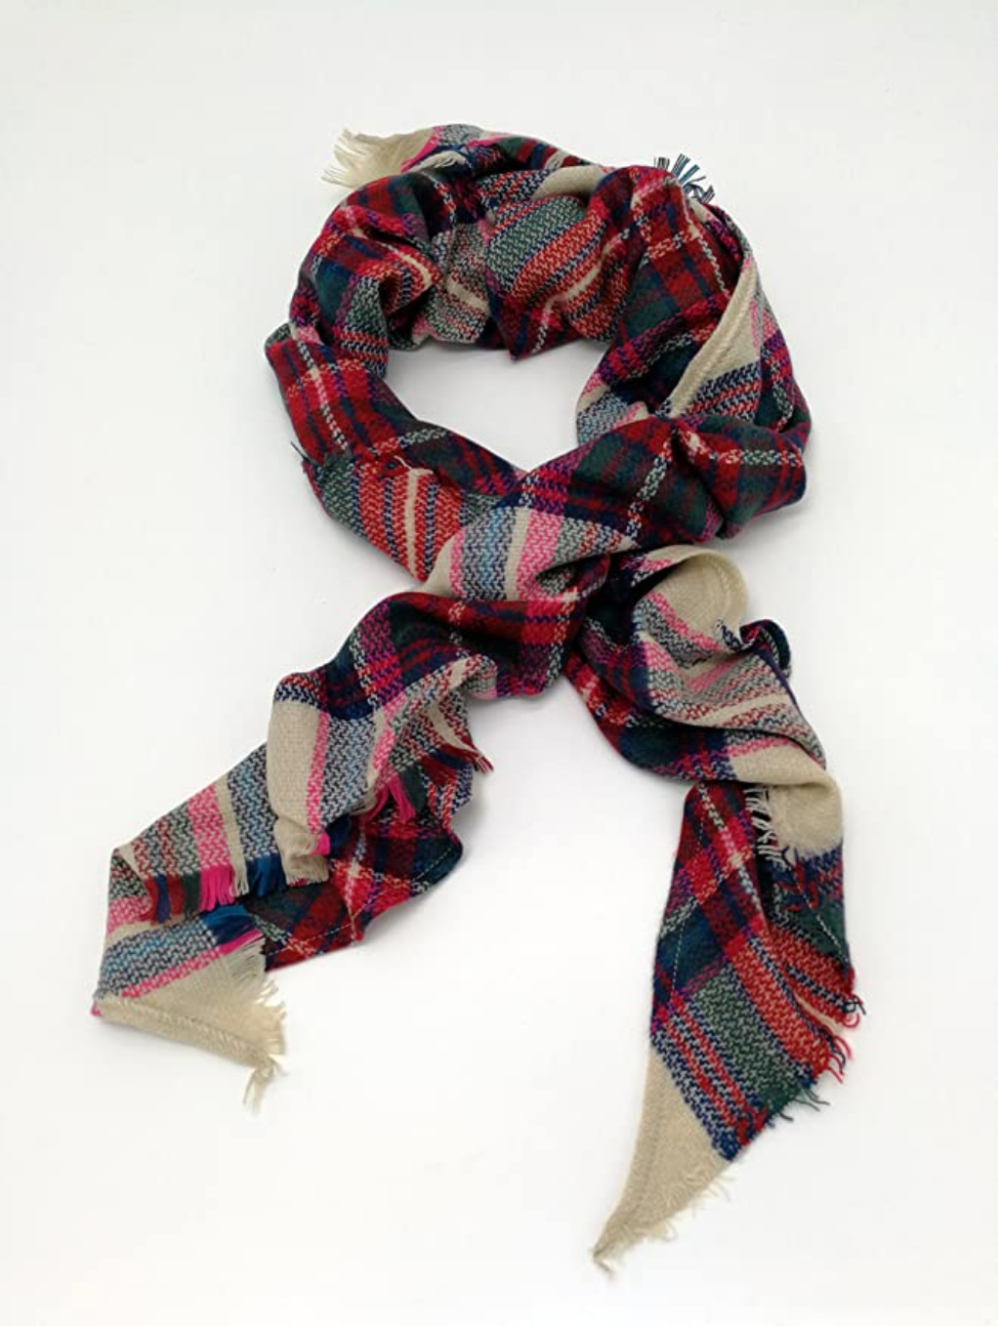 Wander Agio Bestselling Scarf Starts at $13 and Feels Like